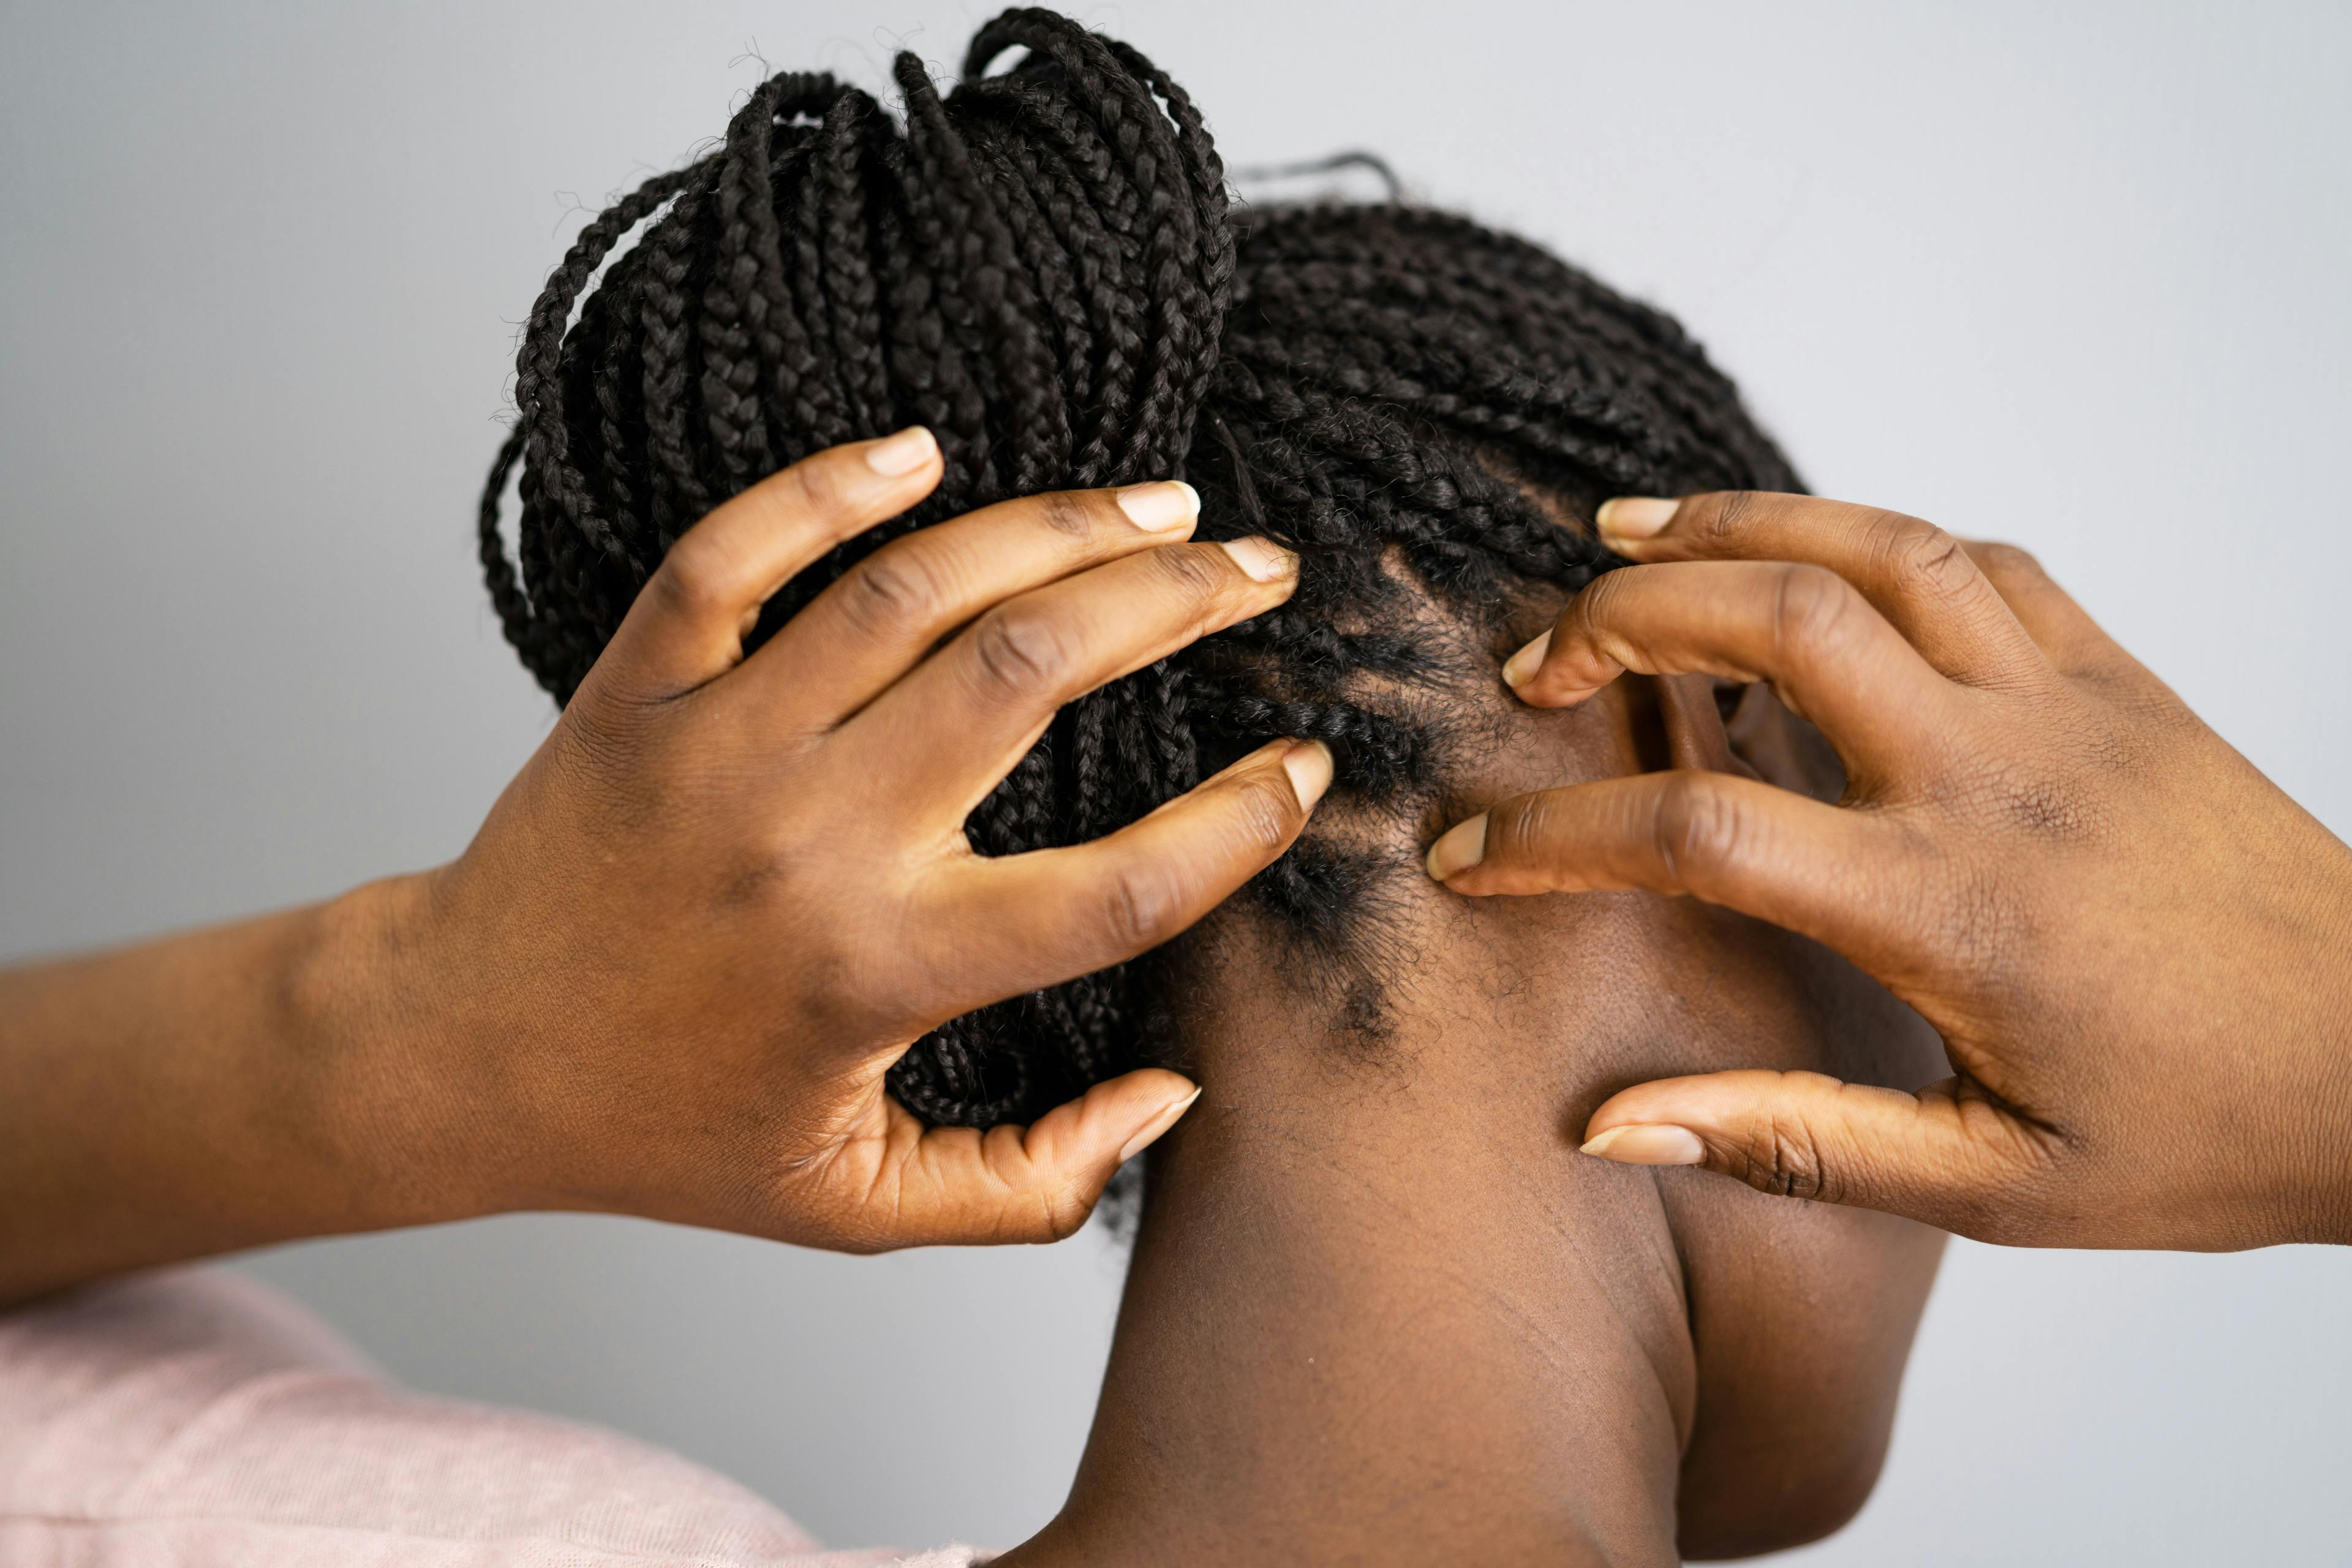 Itchy scalp with braids | Image Credit: Andrey Popov - stock.adobe.com